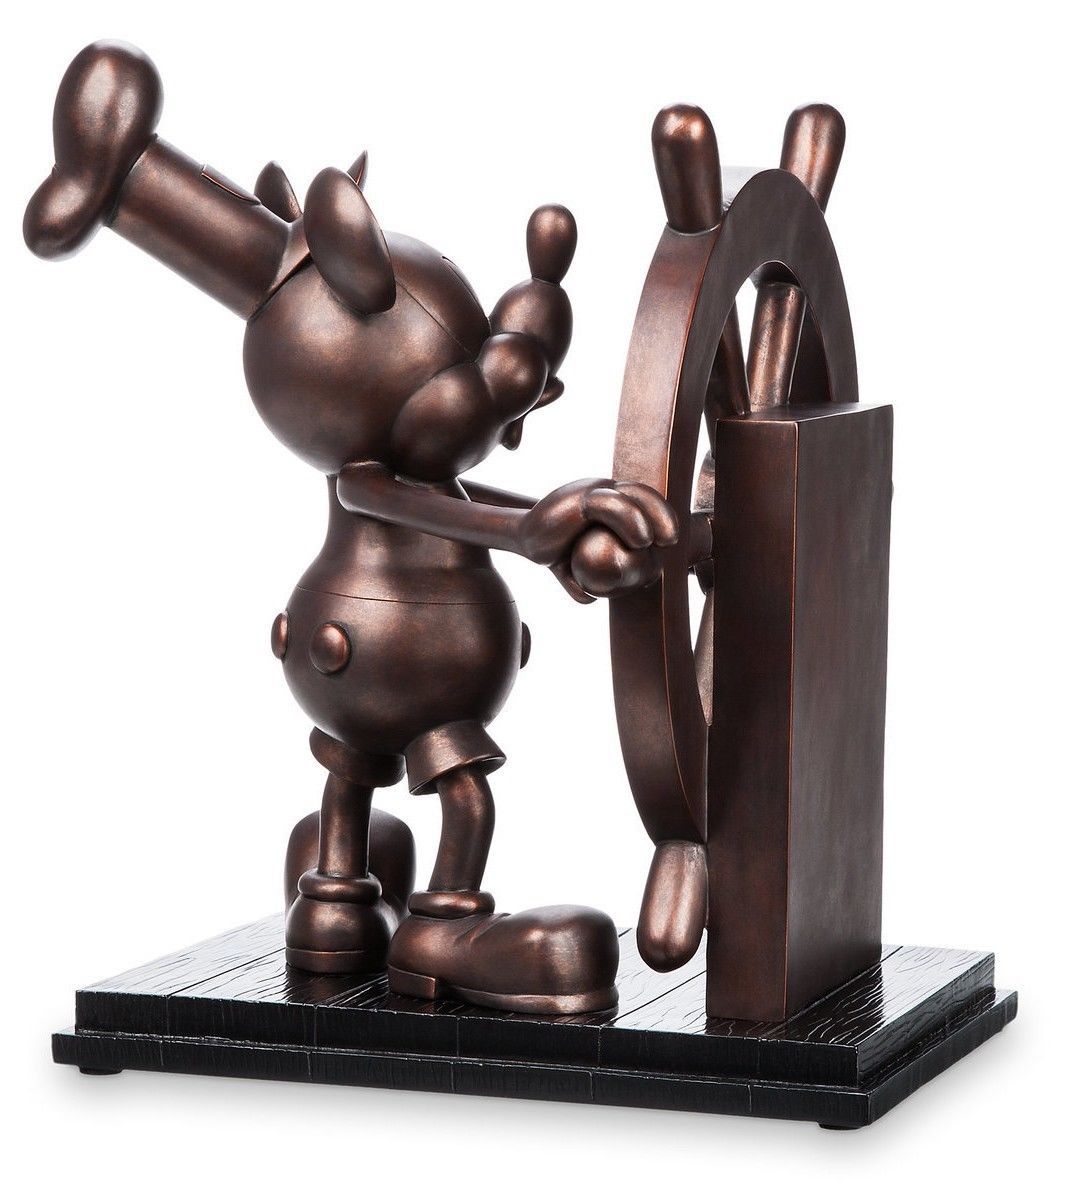 Disney Store Mickey Steamboat Willie Bronzed Figurine Limited Edition New w Box